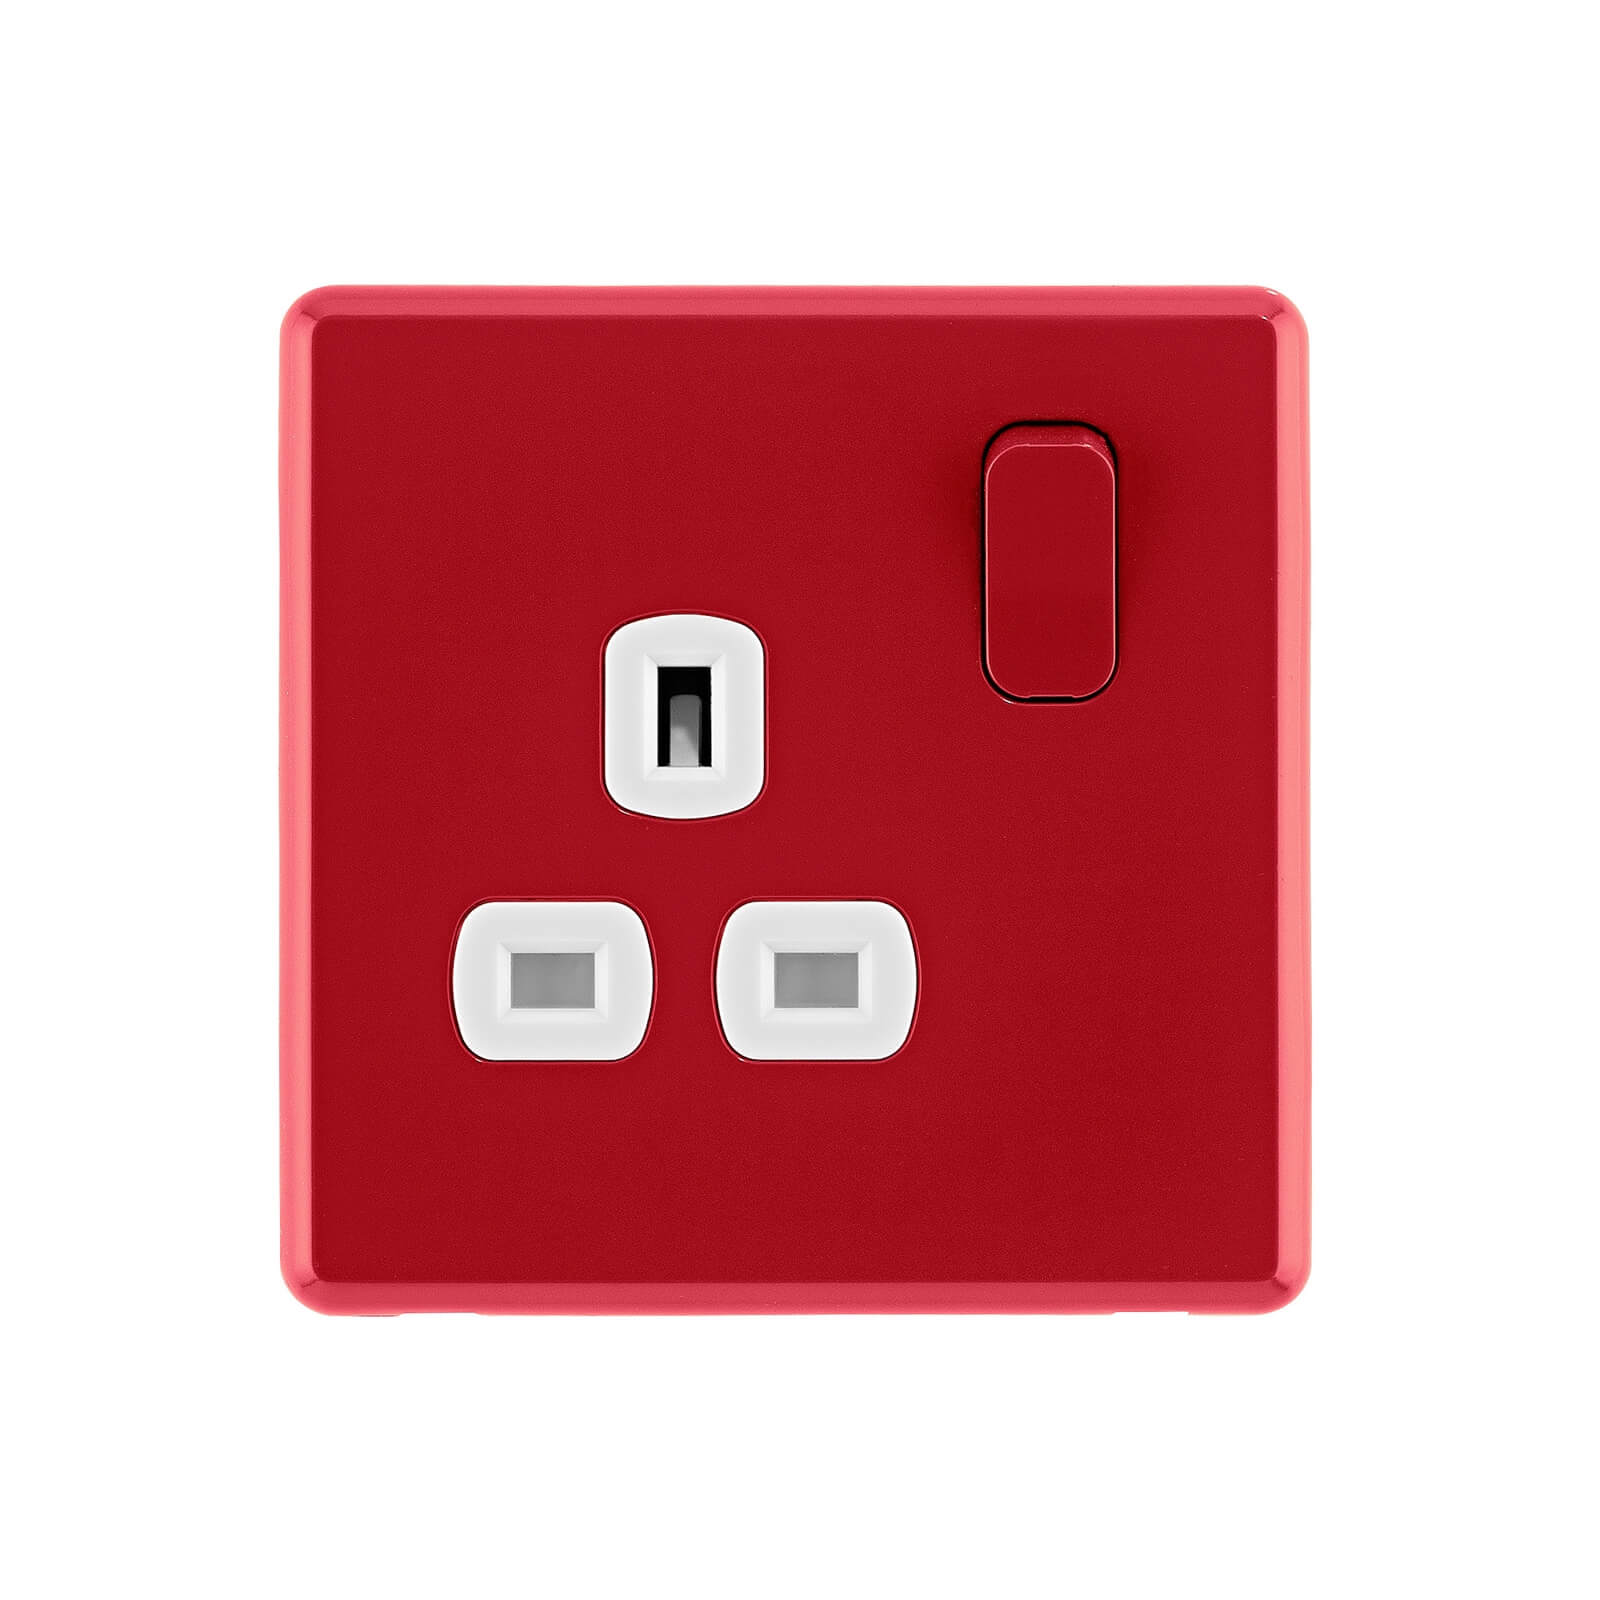 Photo of Arlec Rocker 13a 1 Gang Cherry Red Single Switched Socket